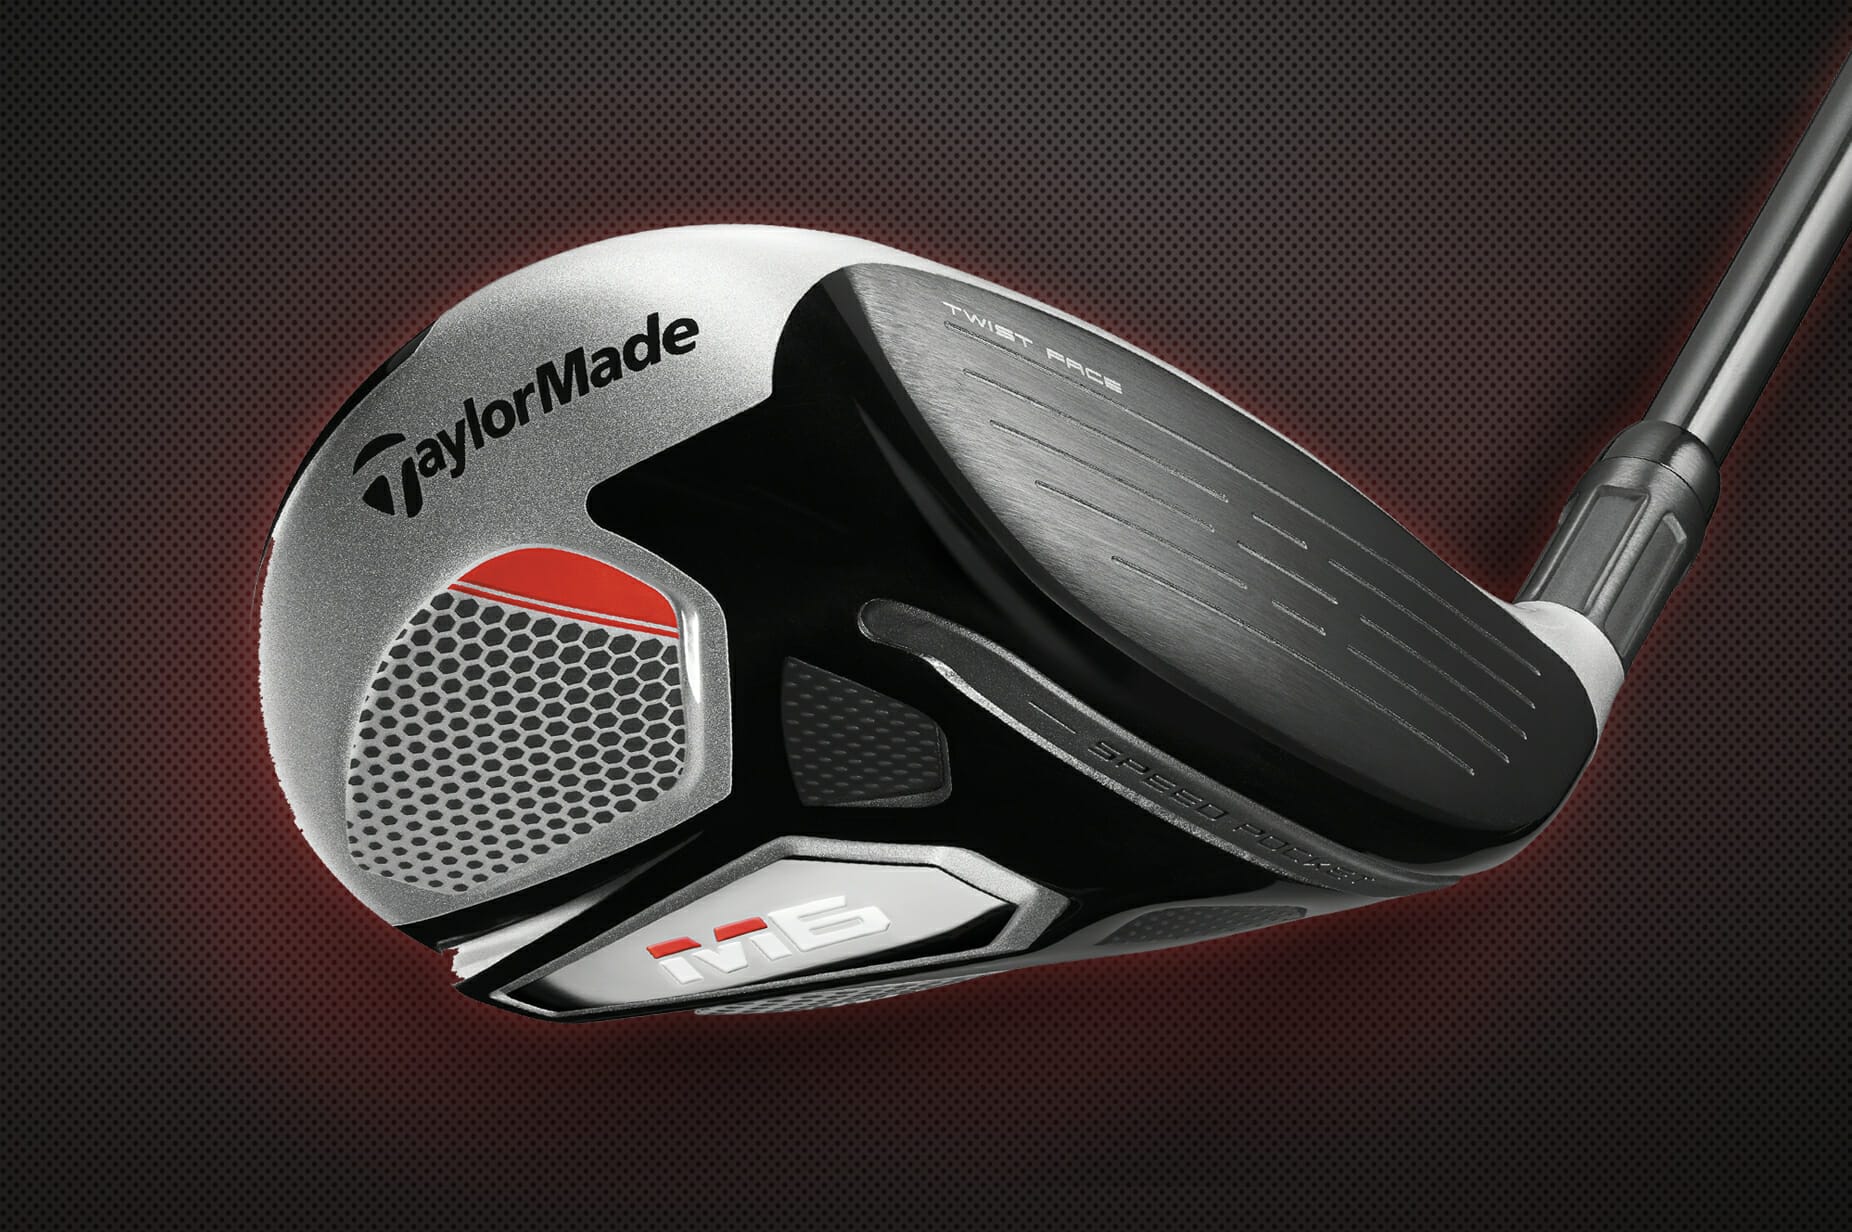 TaylorMade M6 Fairway Wood – Now with Twist Face